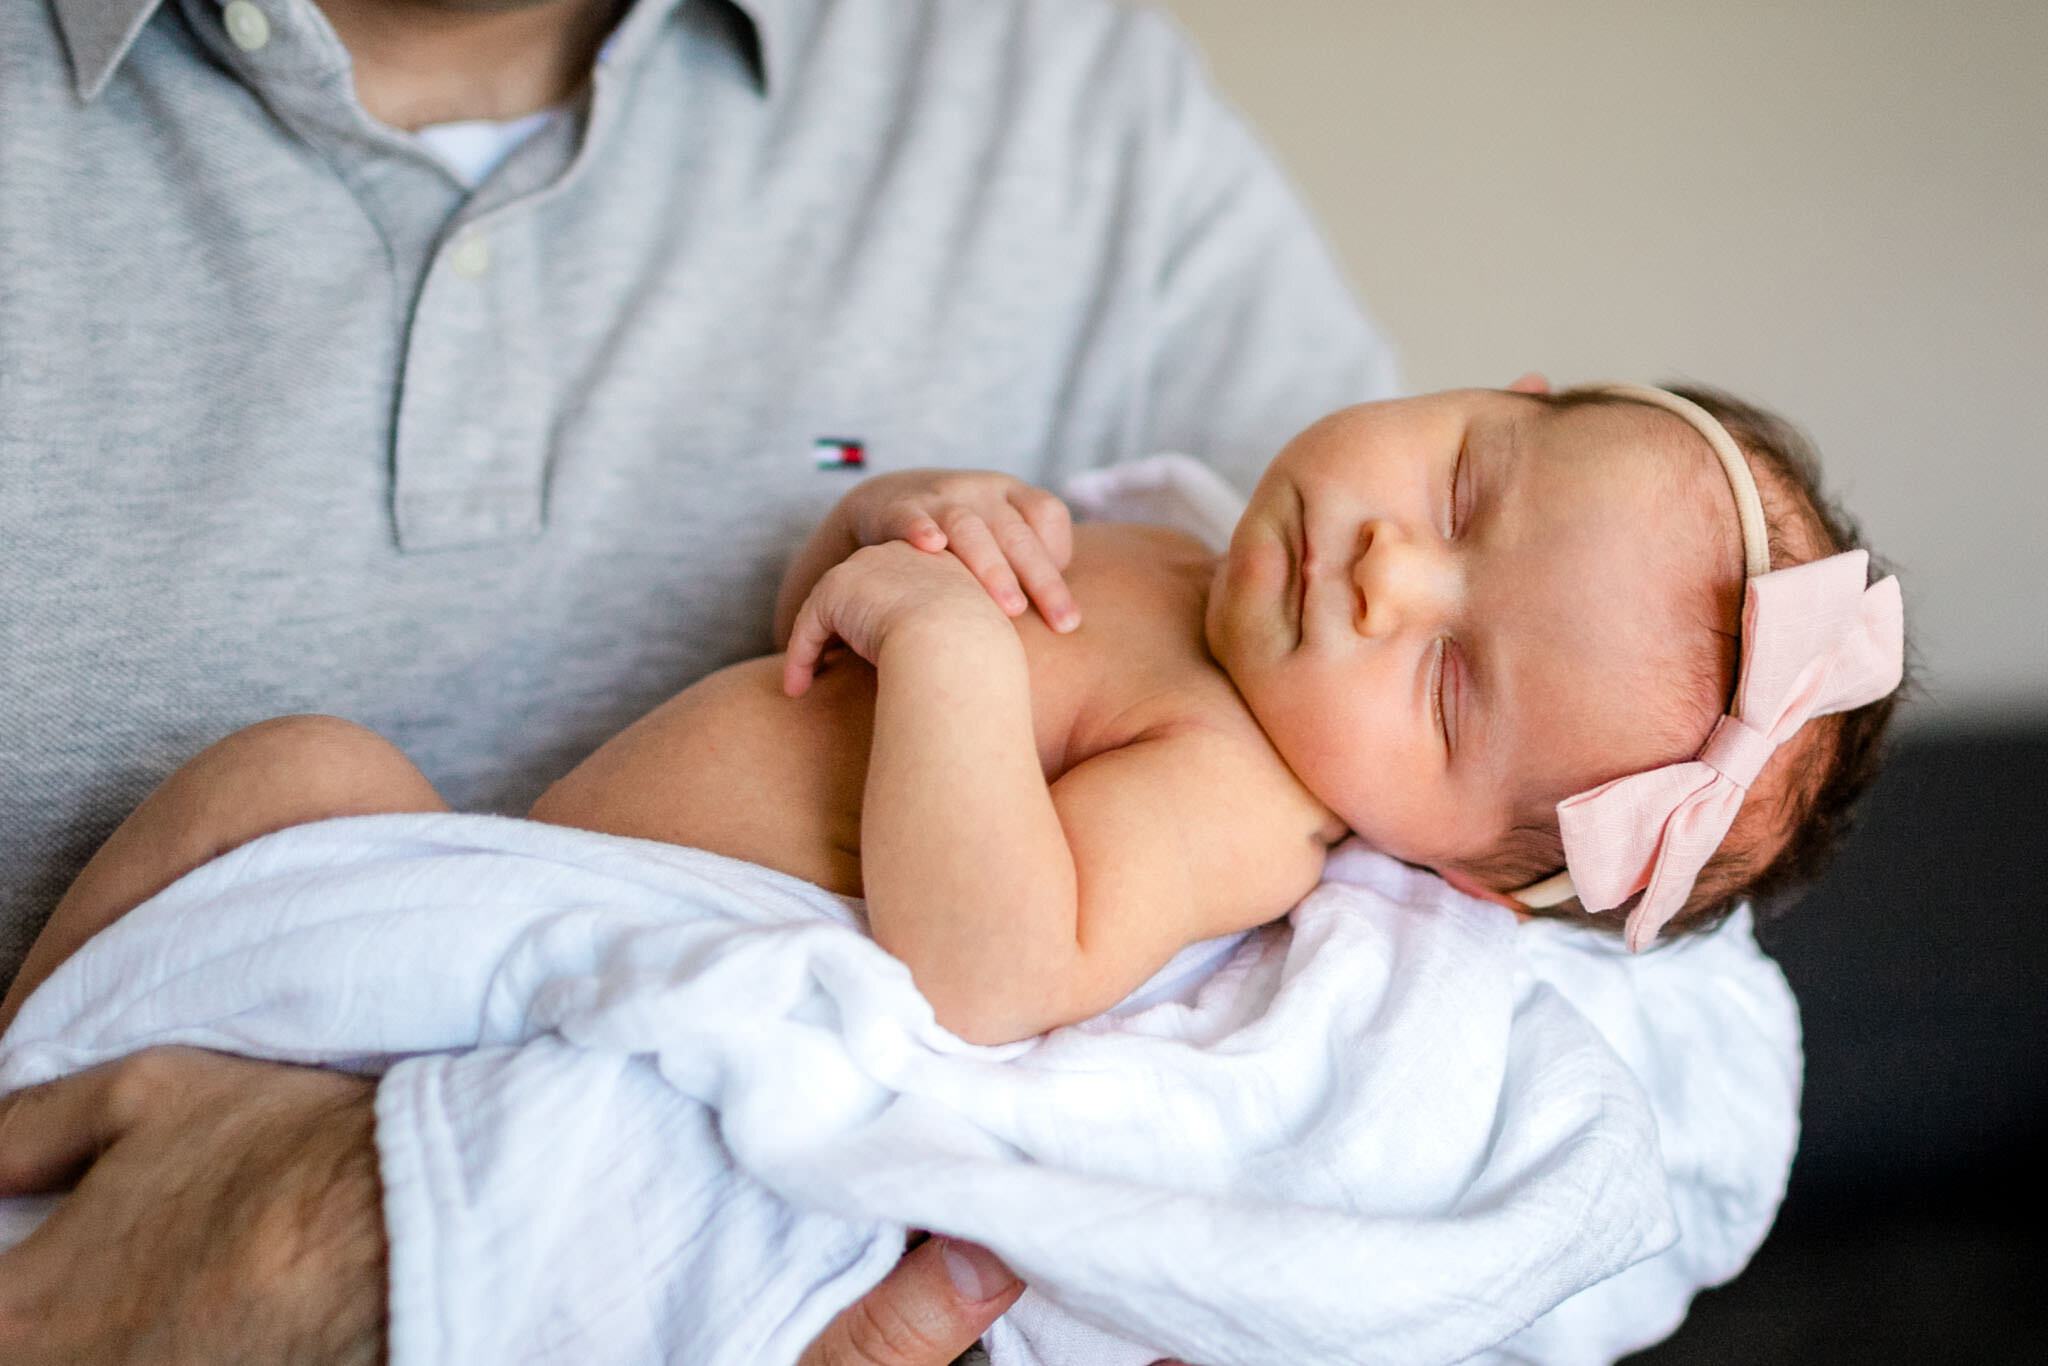 Raleigh Newborn Photographer | By G. Lin Photography | Close up image of baby girl sleeping in father's arms